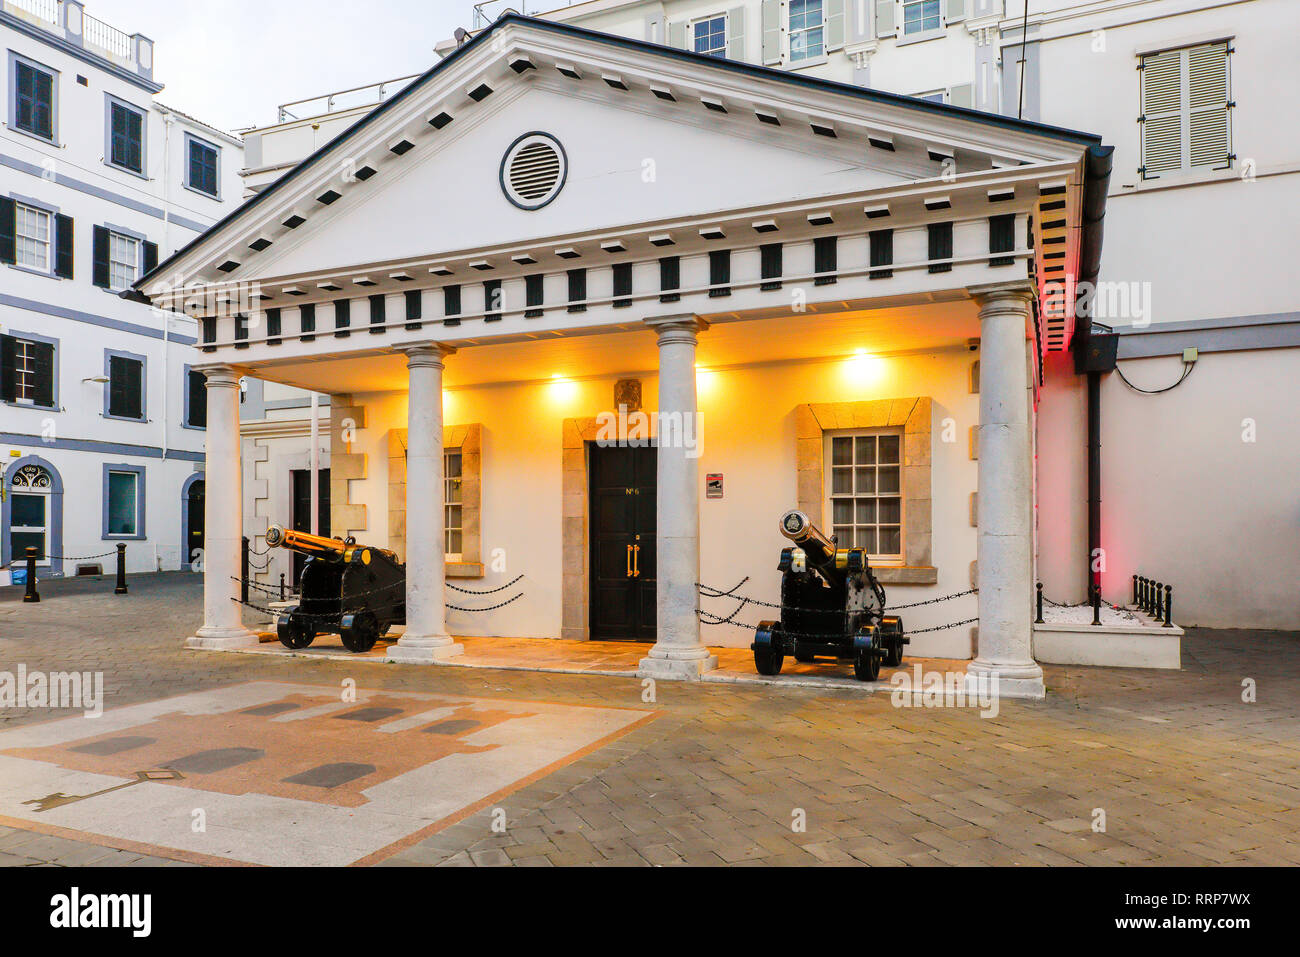 Street view of Government building on Main street, with two cannons, Gibraltar, British Overseas Territory. Stock Photo